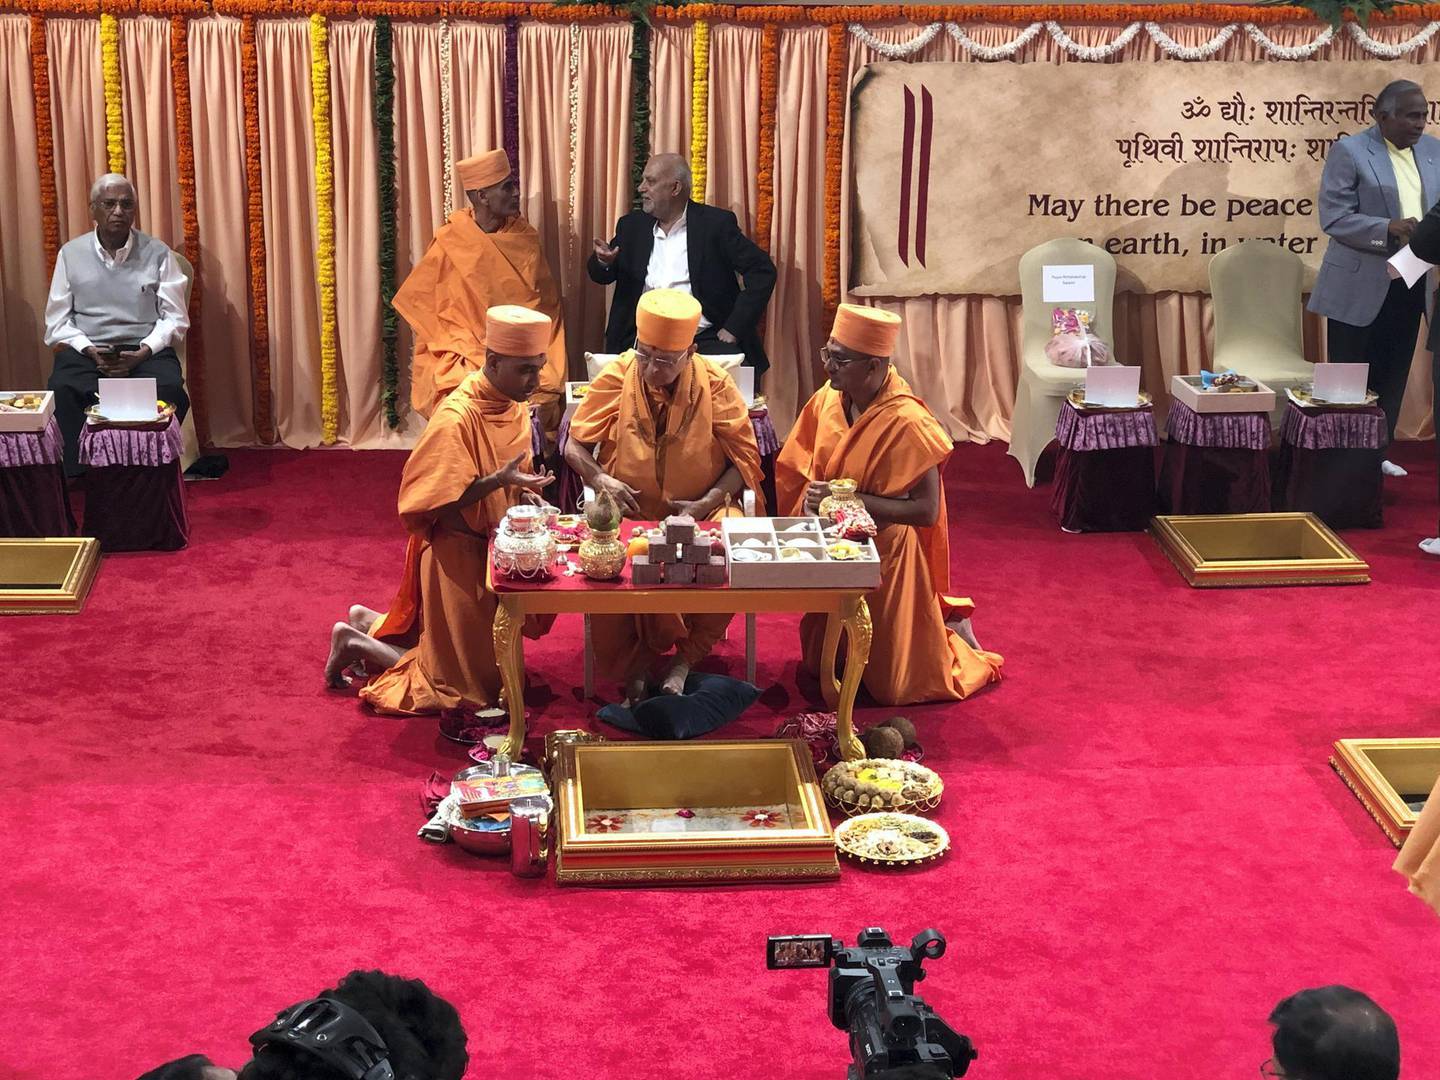 The foundation ceremony of the first traditional Hindu temple in the UAE is performed in the holy presence of His Holiness Mahant Swami Maharaj, the spiritual leader of BAPS Swaminarayan Sanstha. 